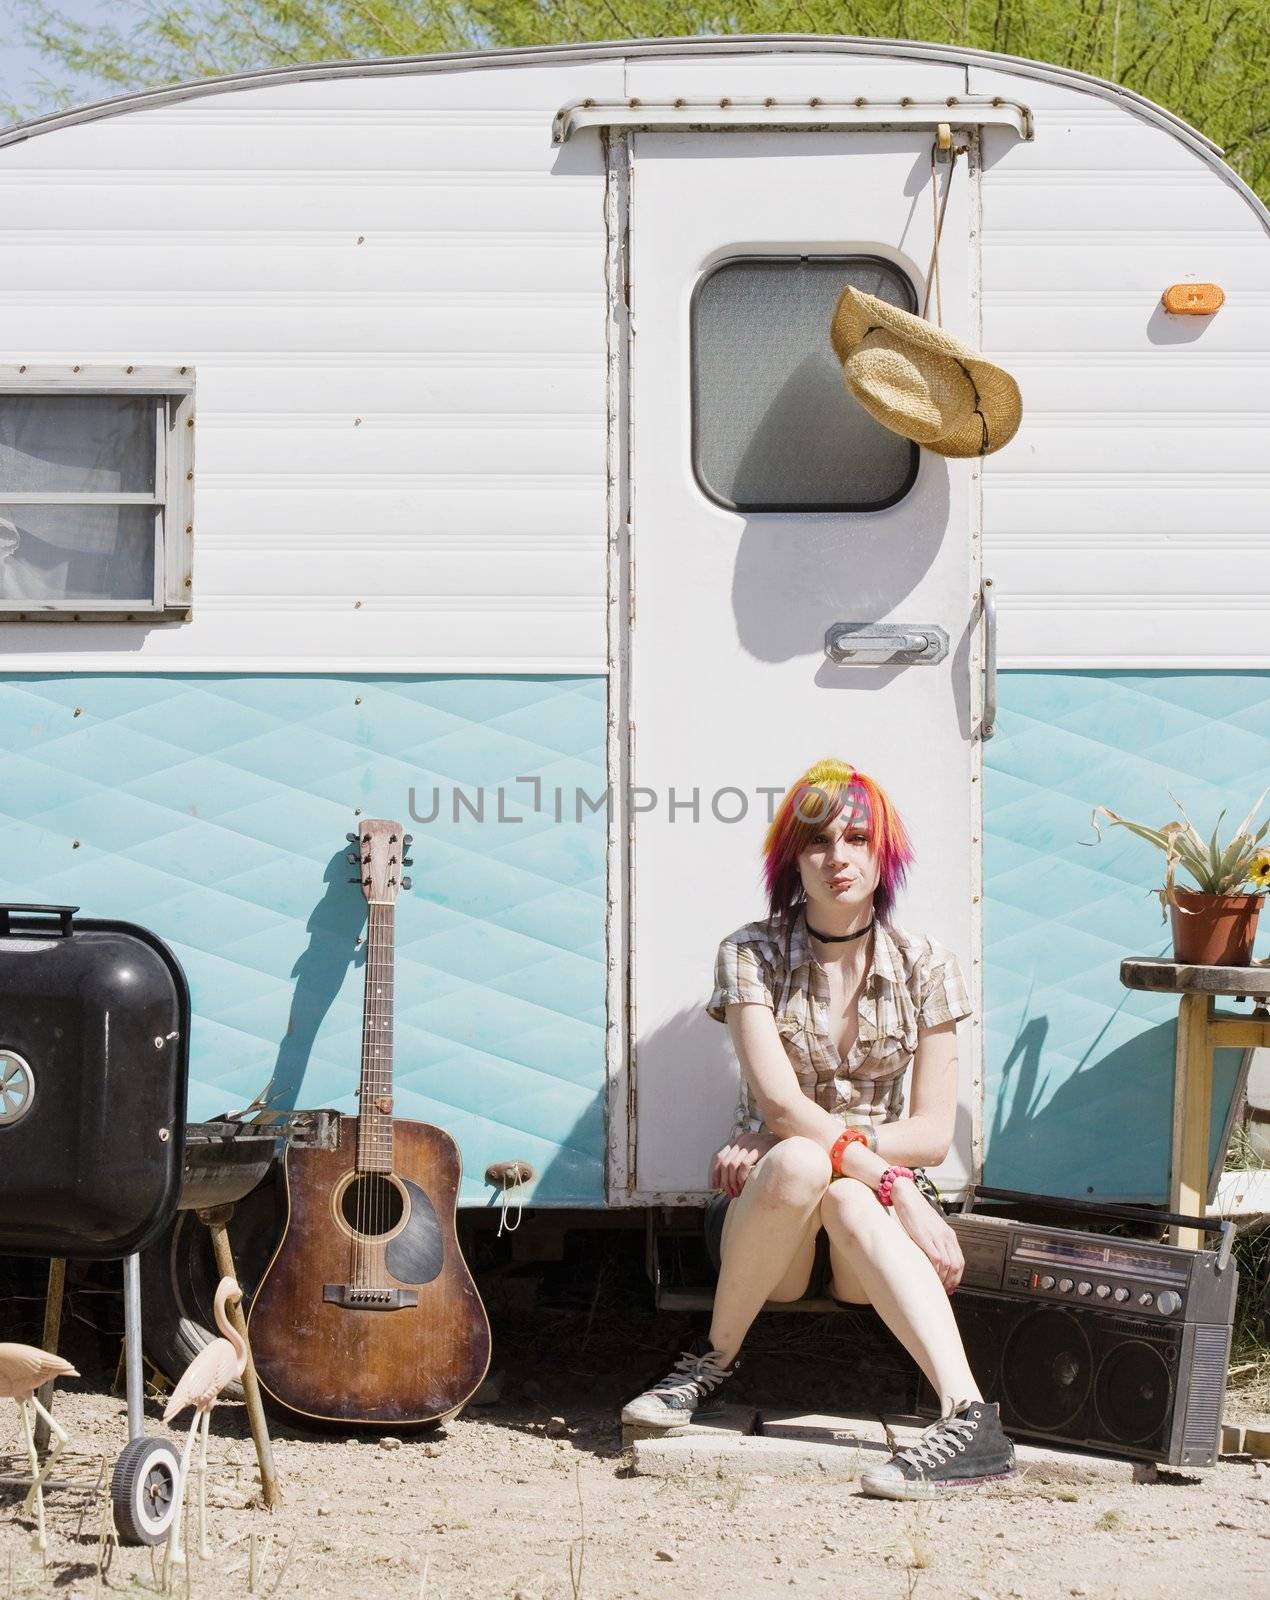 Punk girl with brightly colored hair sitting on a trailer step